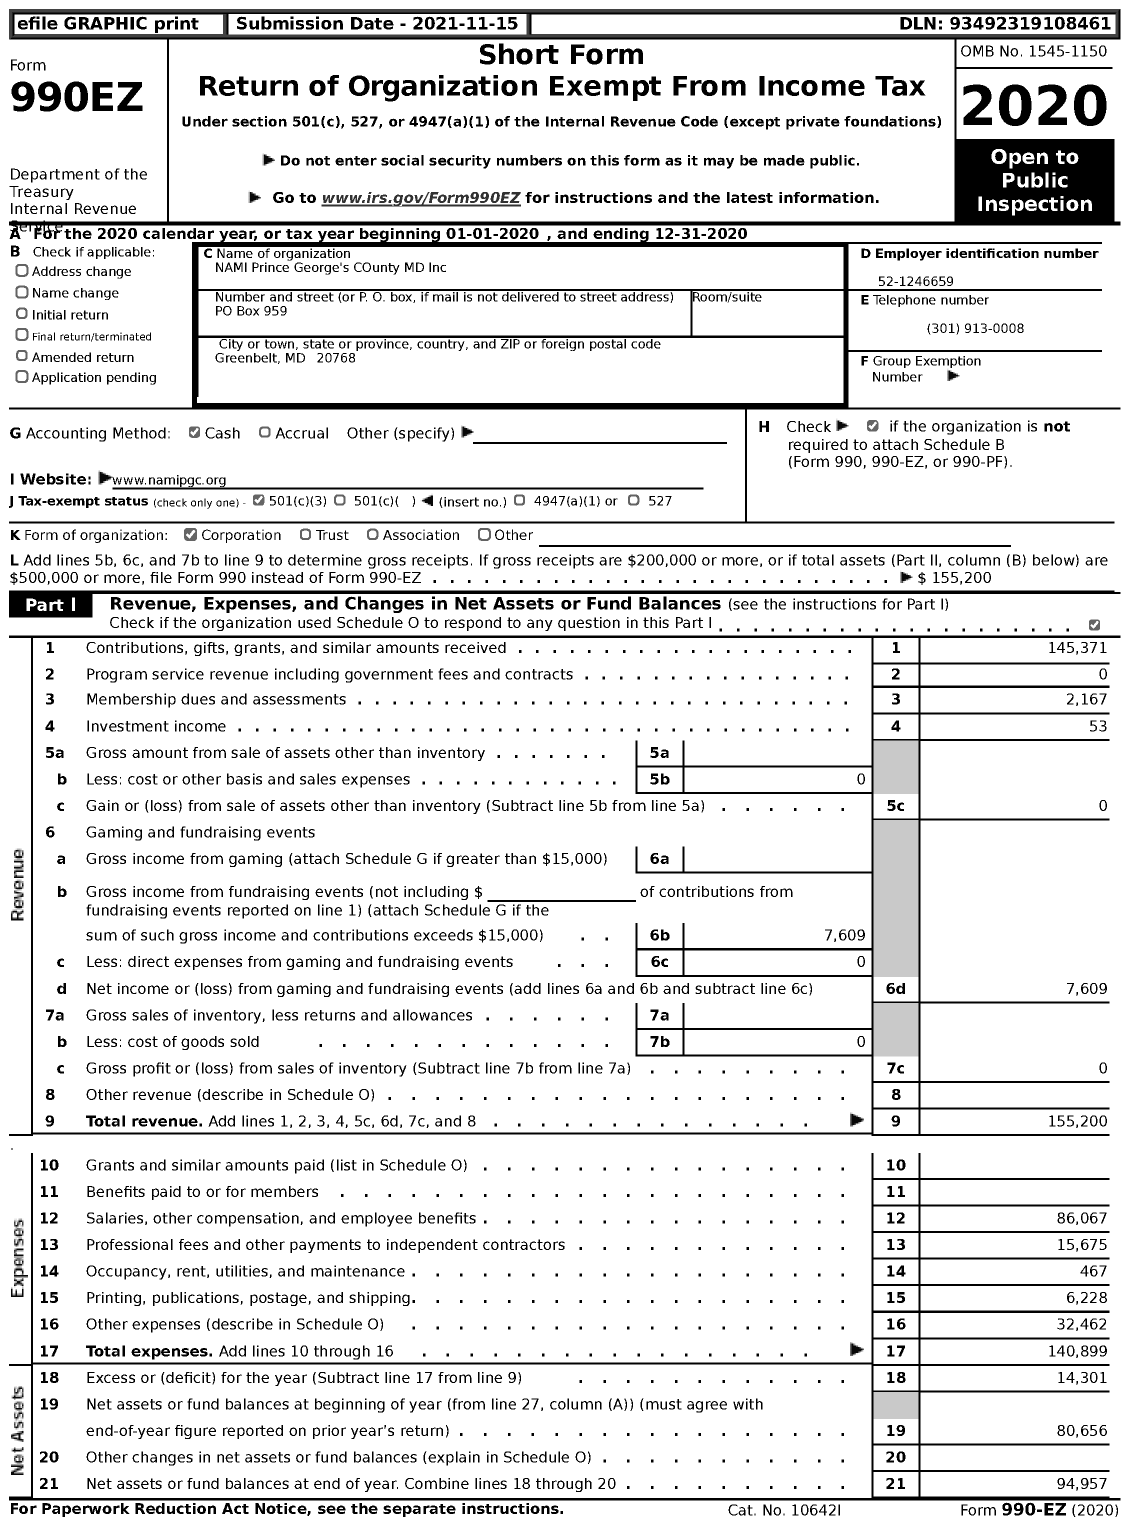 Image of first page of 2020 Form 990EZ for NAMI Prince George's COunty MD